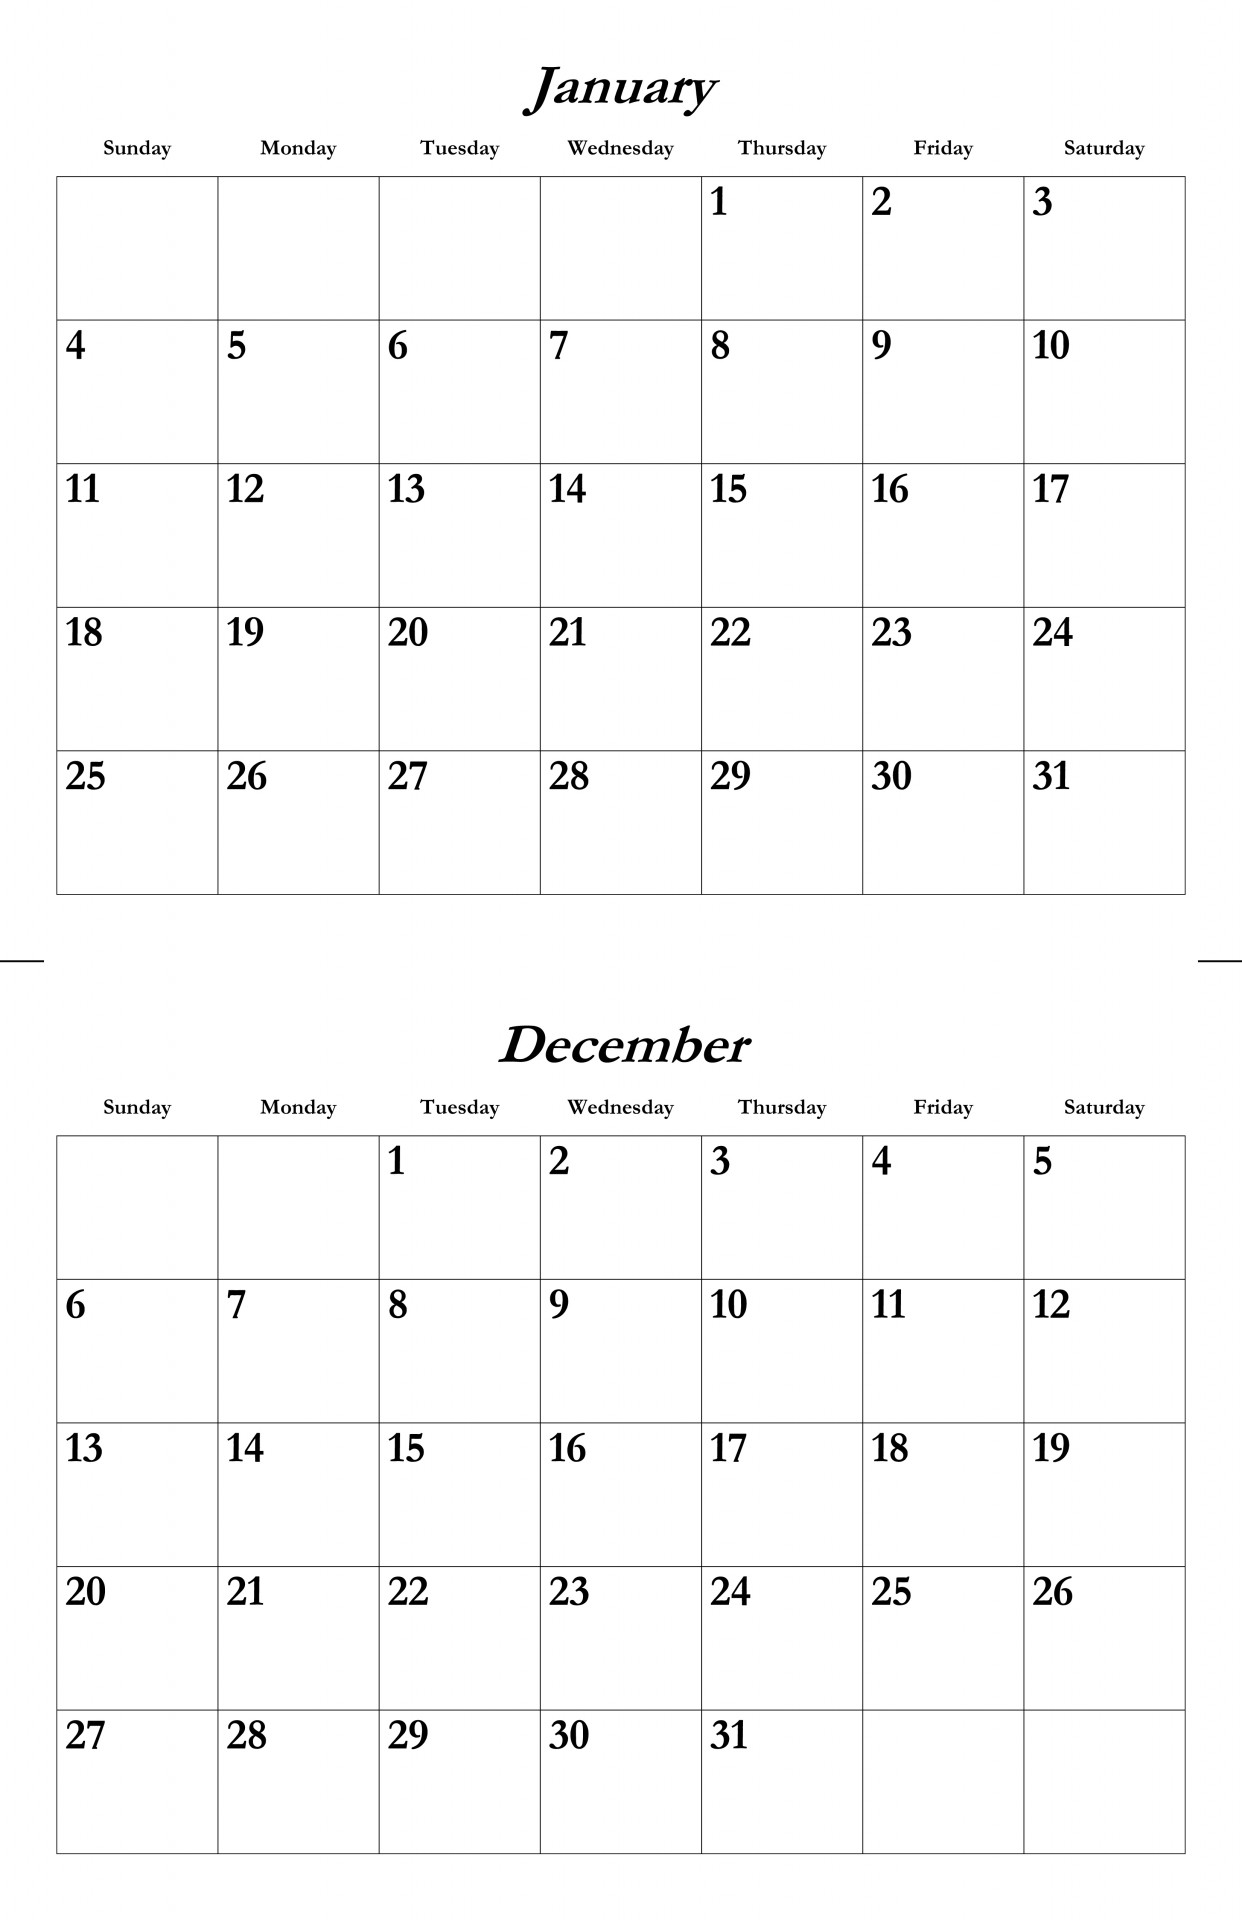 January and December 2015 calendar template - Your premium download is greatly appreciated – enjoy!